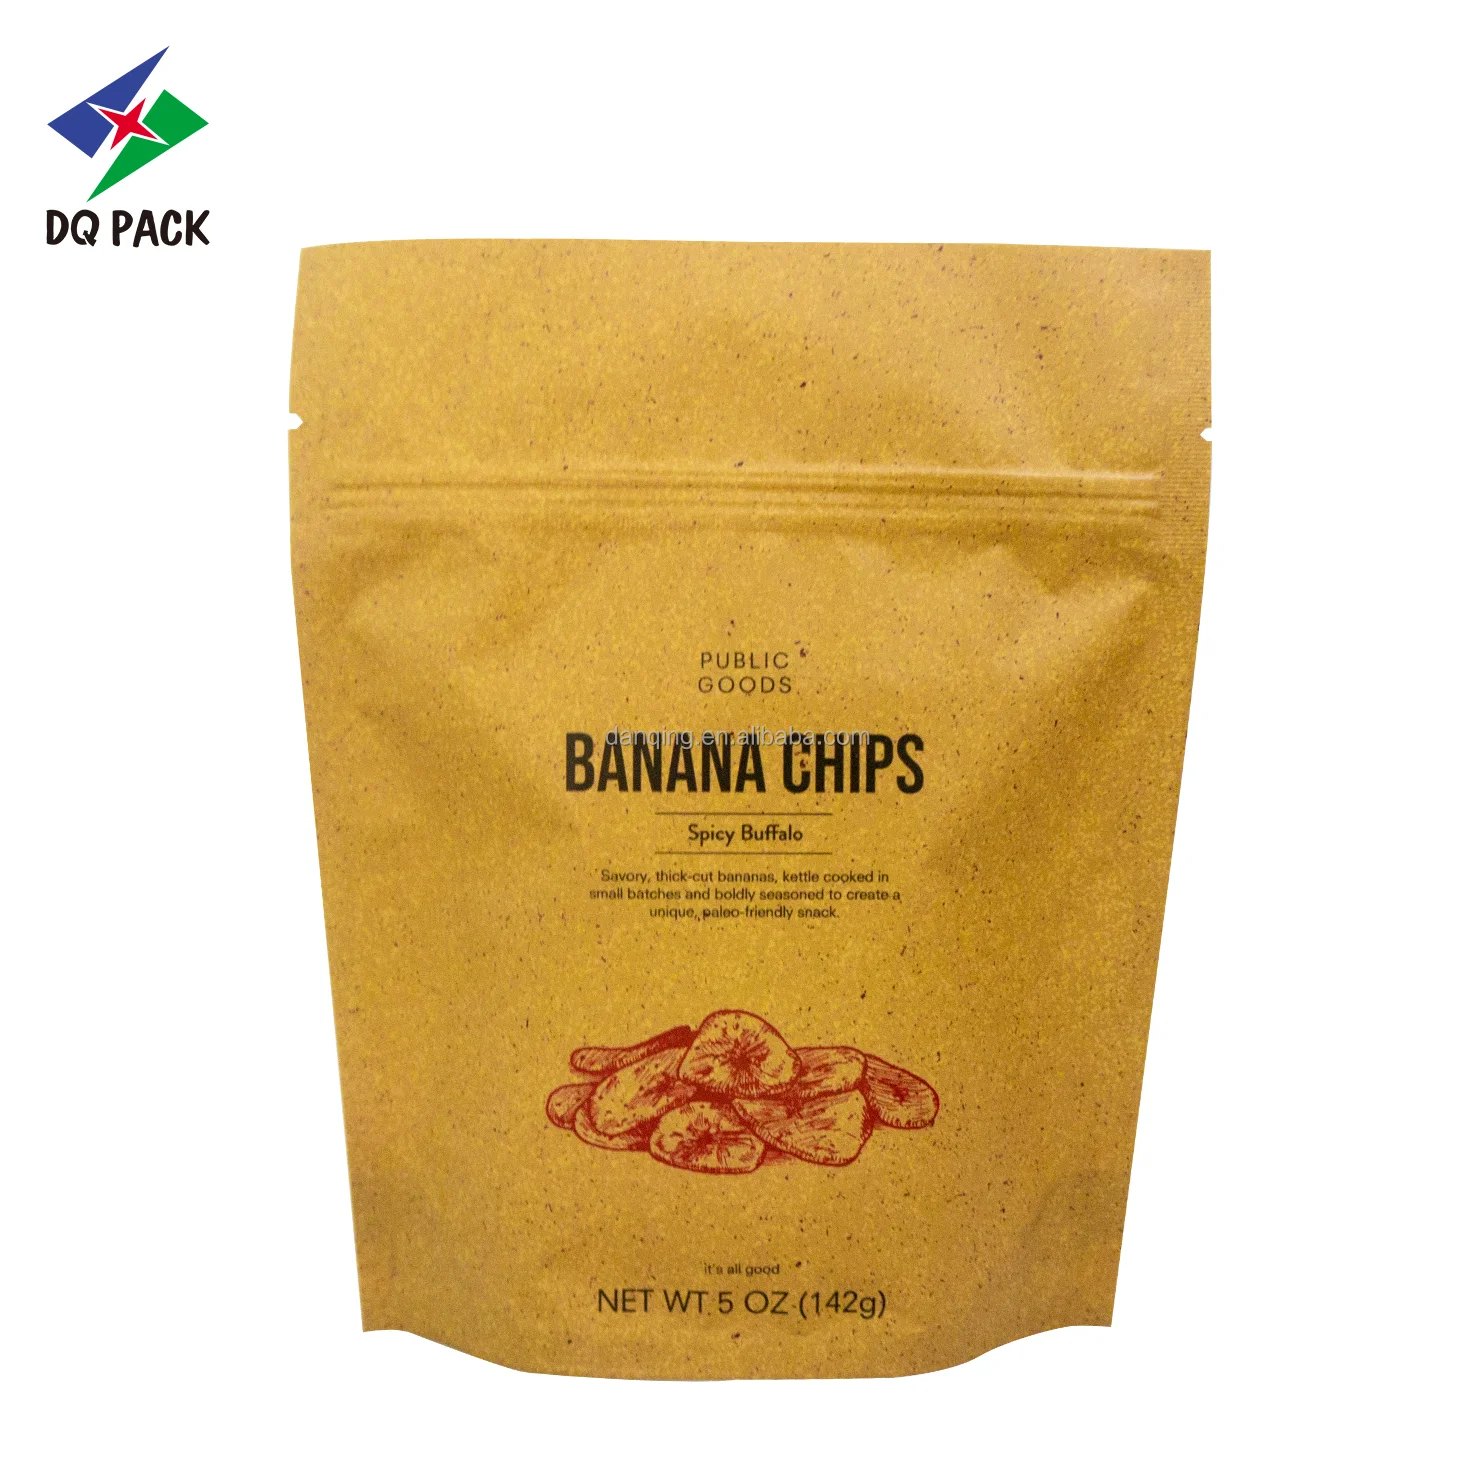 DQ PACK China Dried Banana Chips Snack Food Packaging Bag